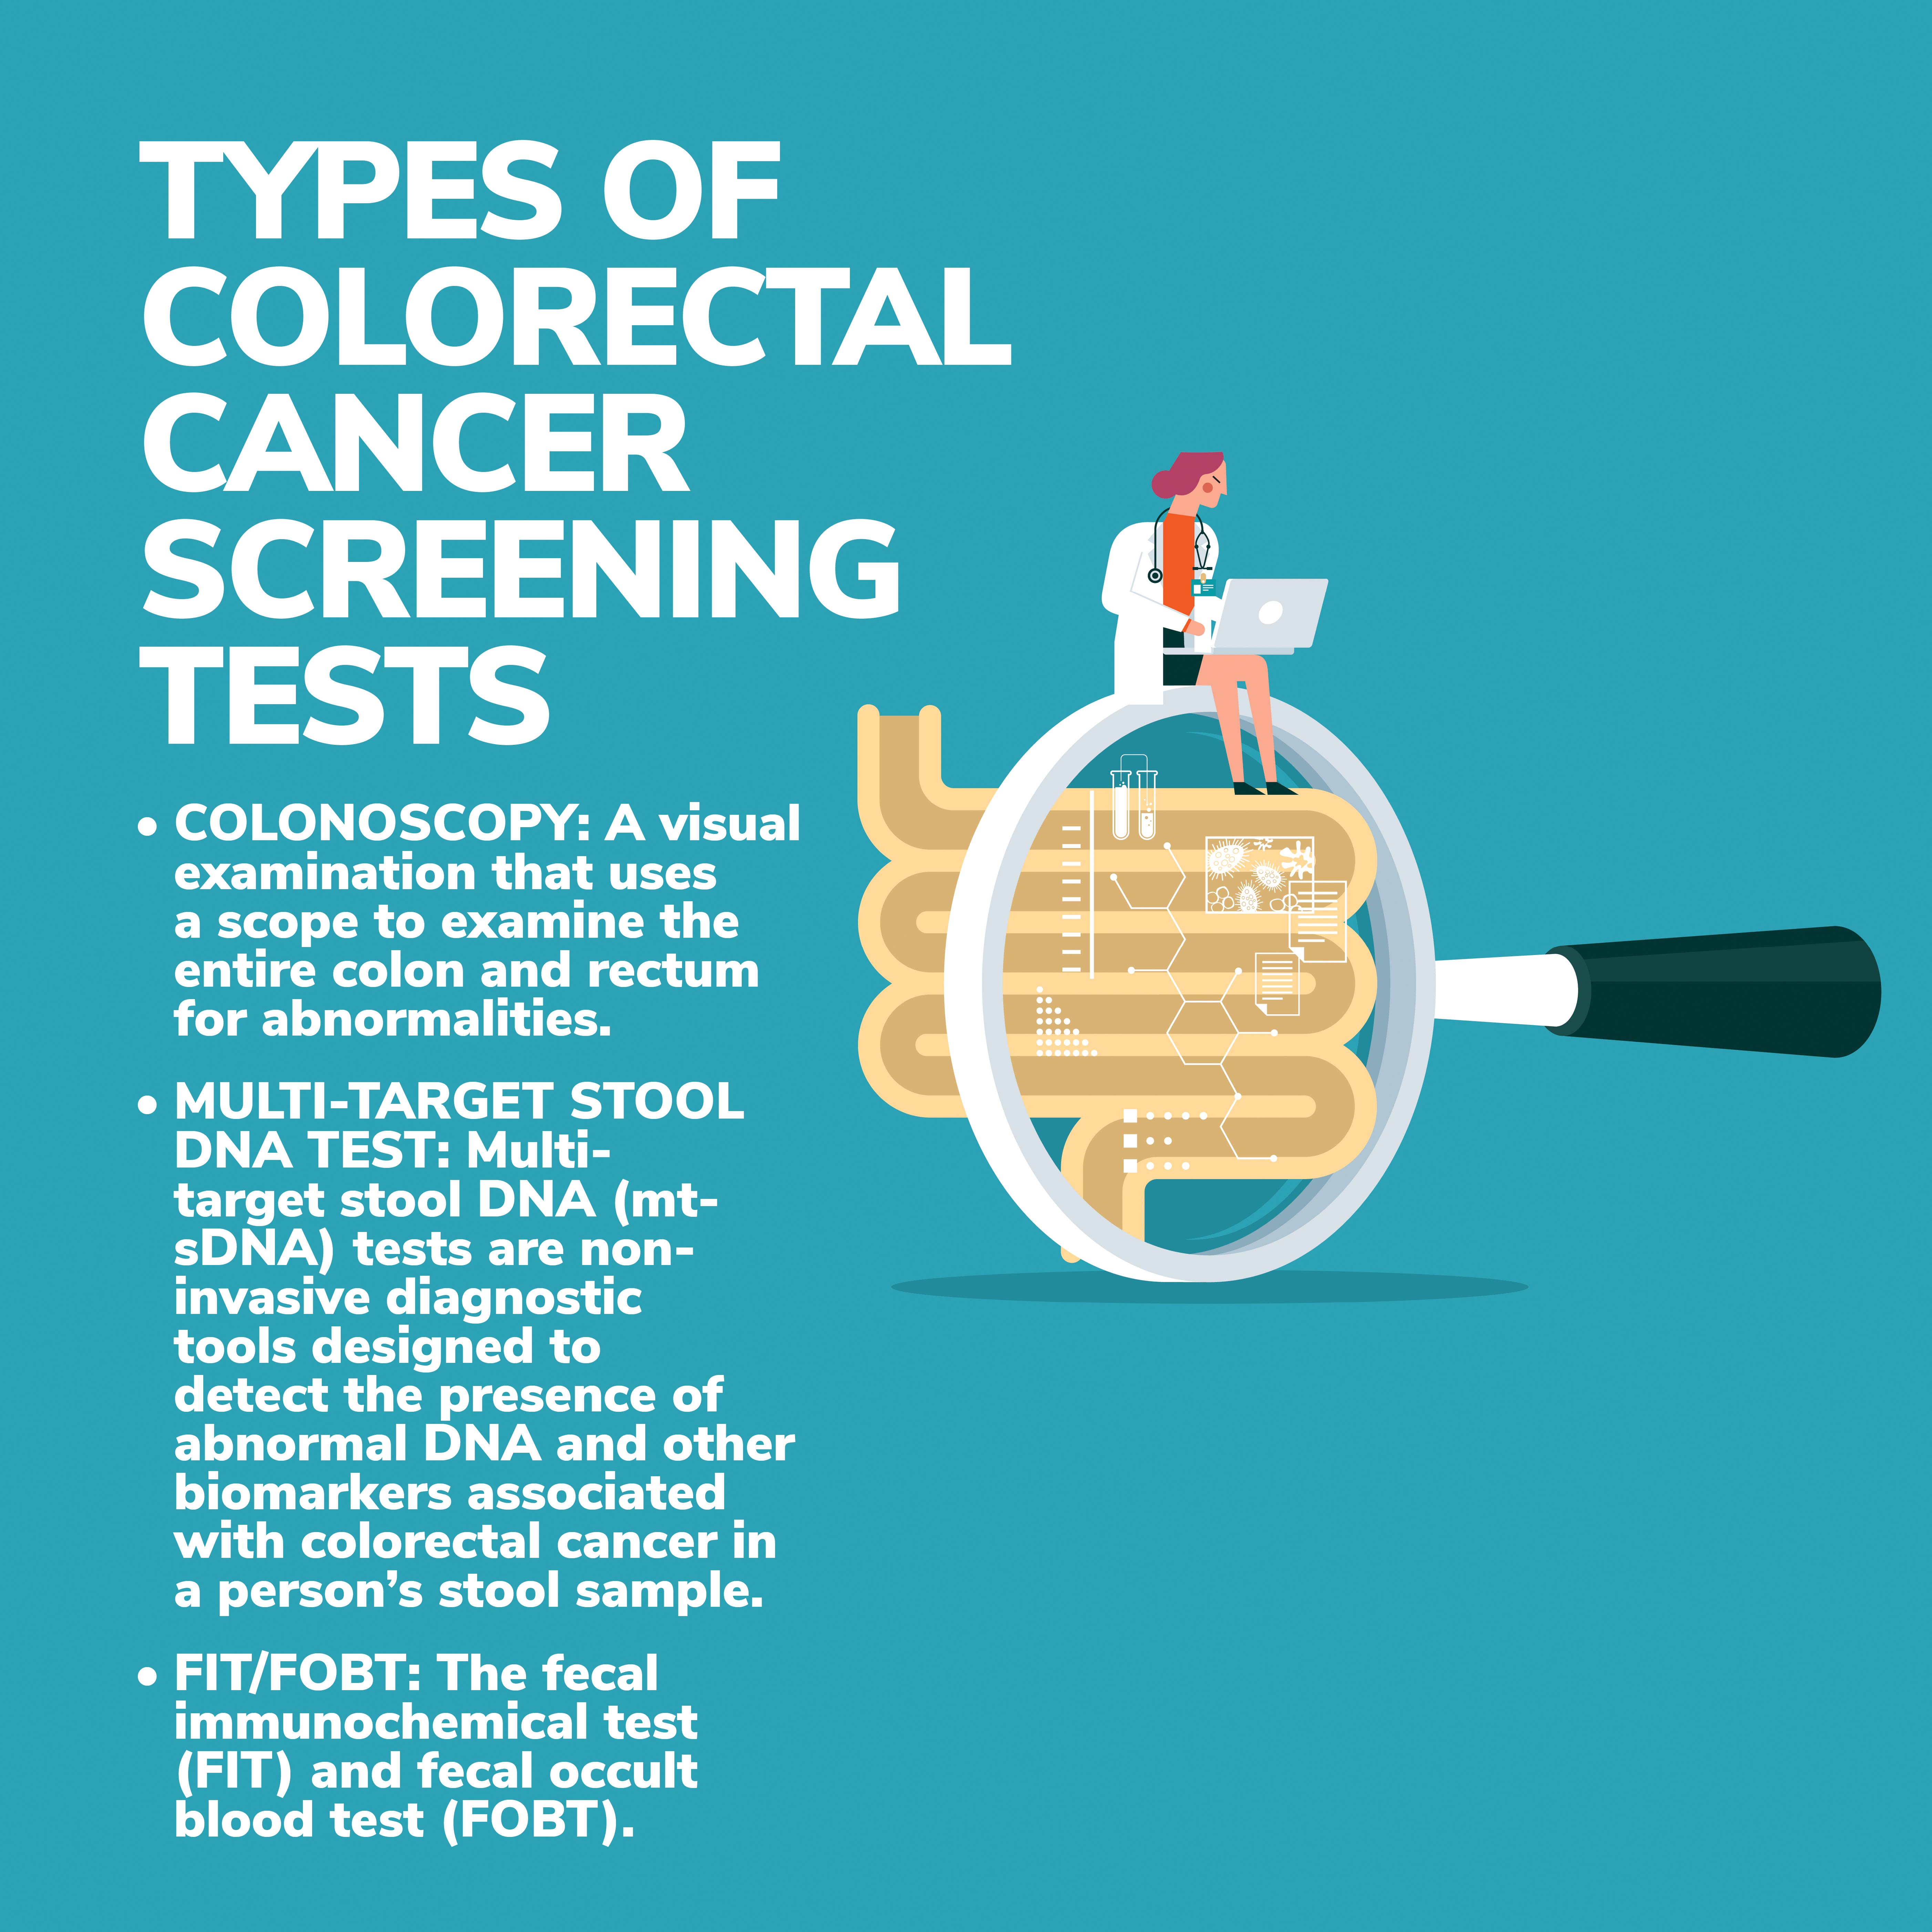 Colorectal Cancer Screening Tests